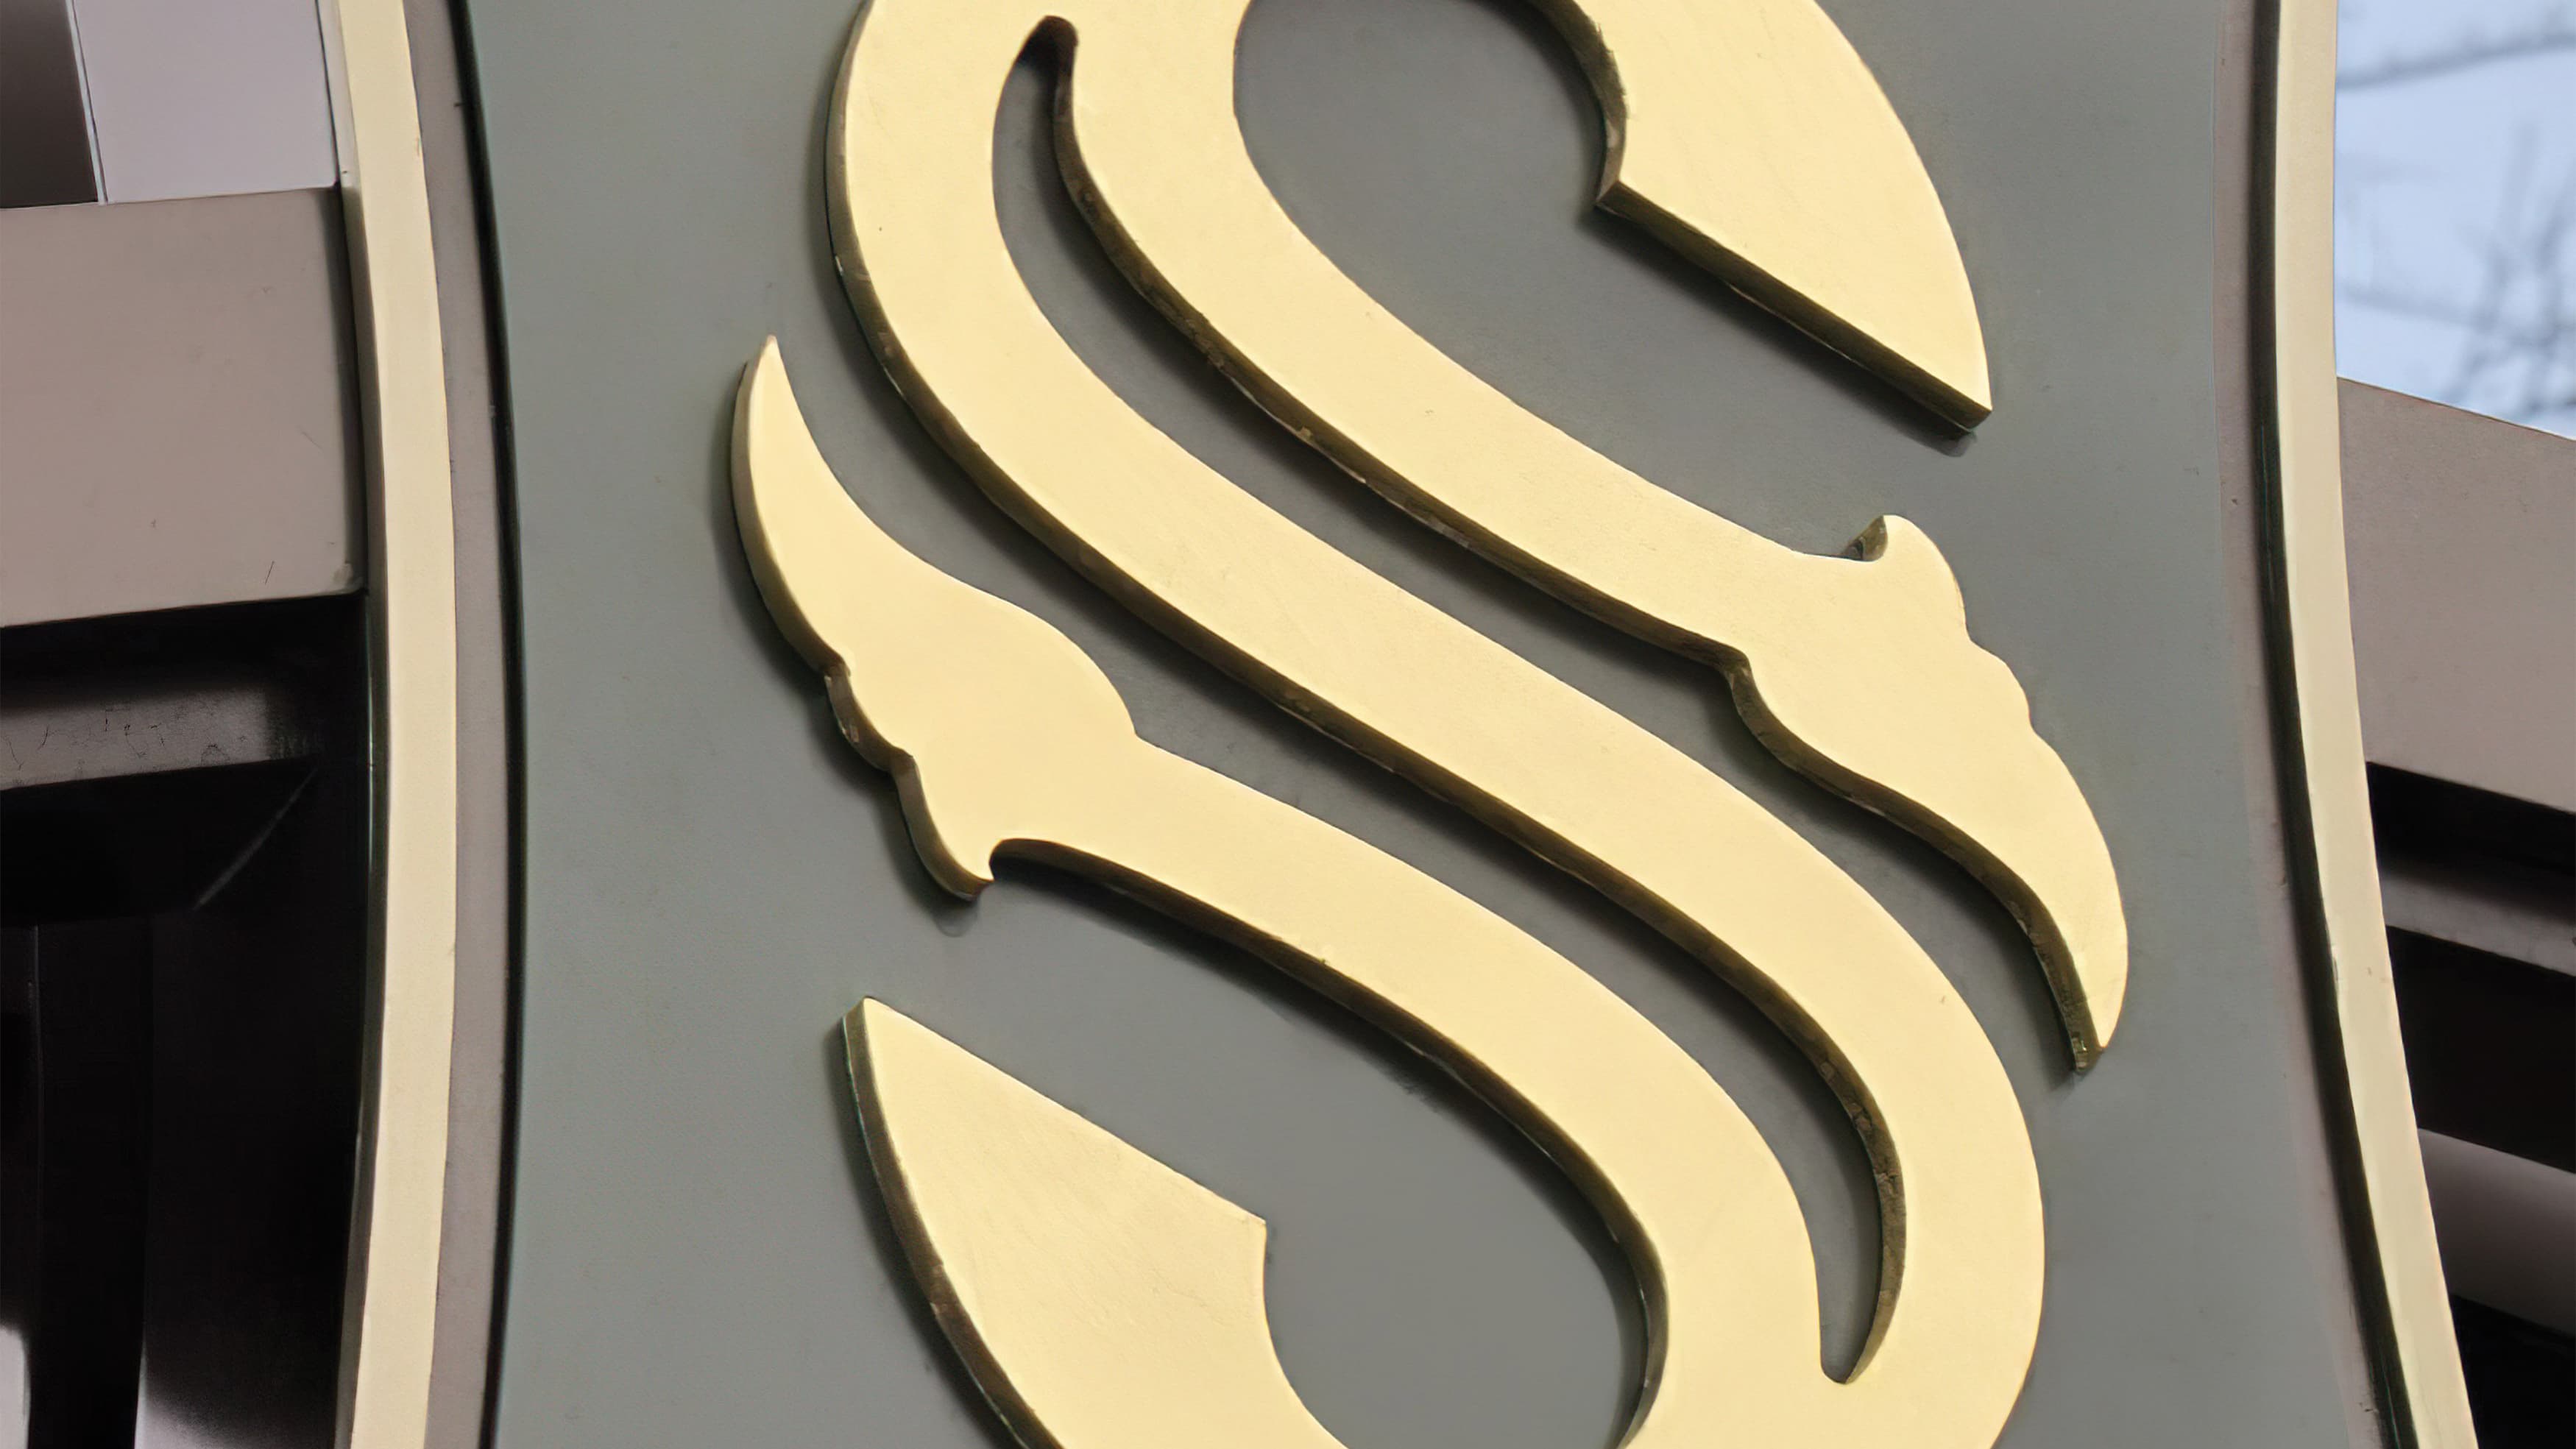 A close-up photo of the S mark of the City of Southlake applied to a sign.